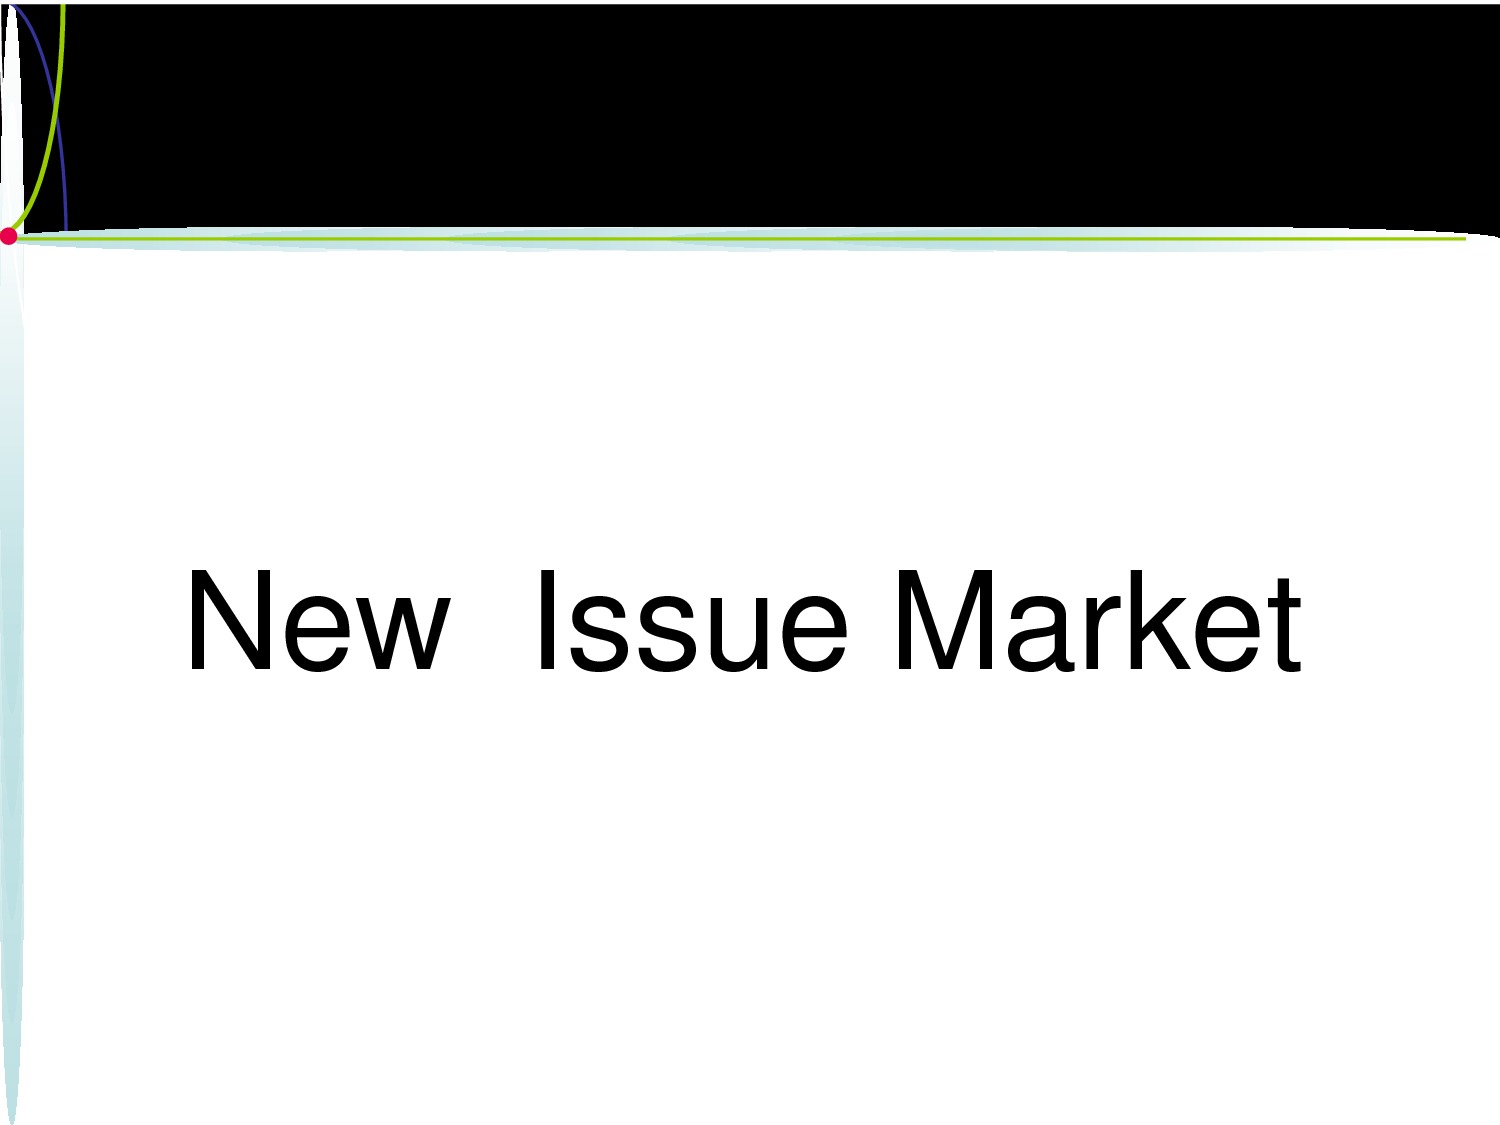 meaning of new issue market